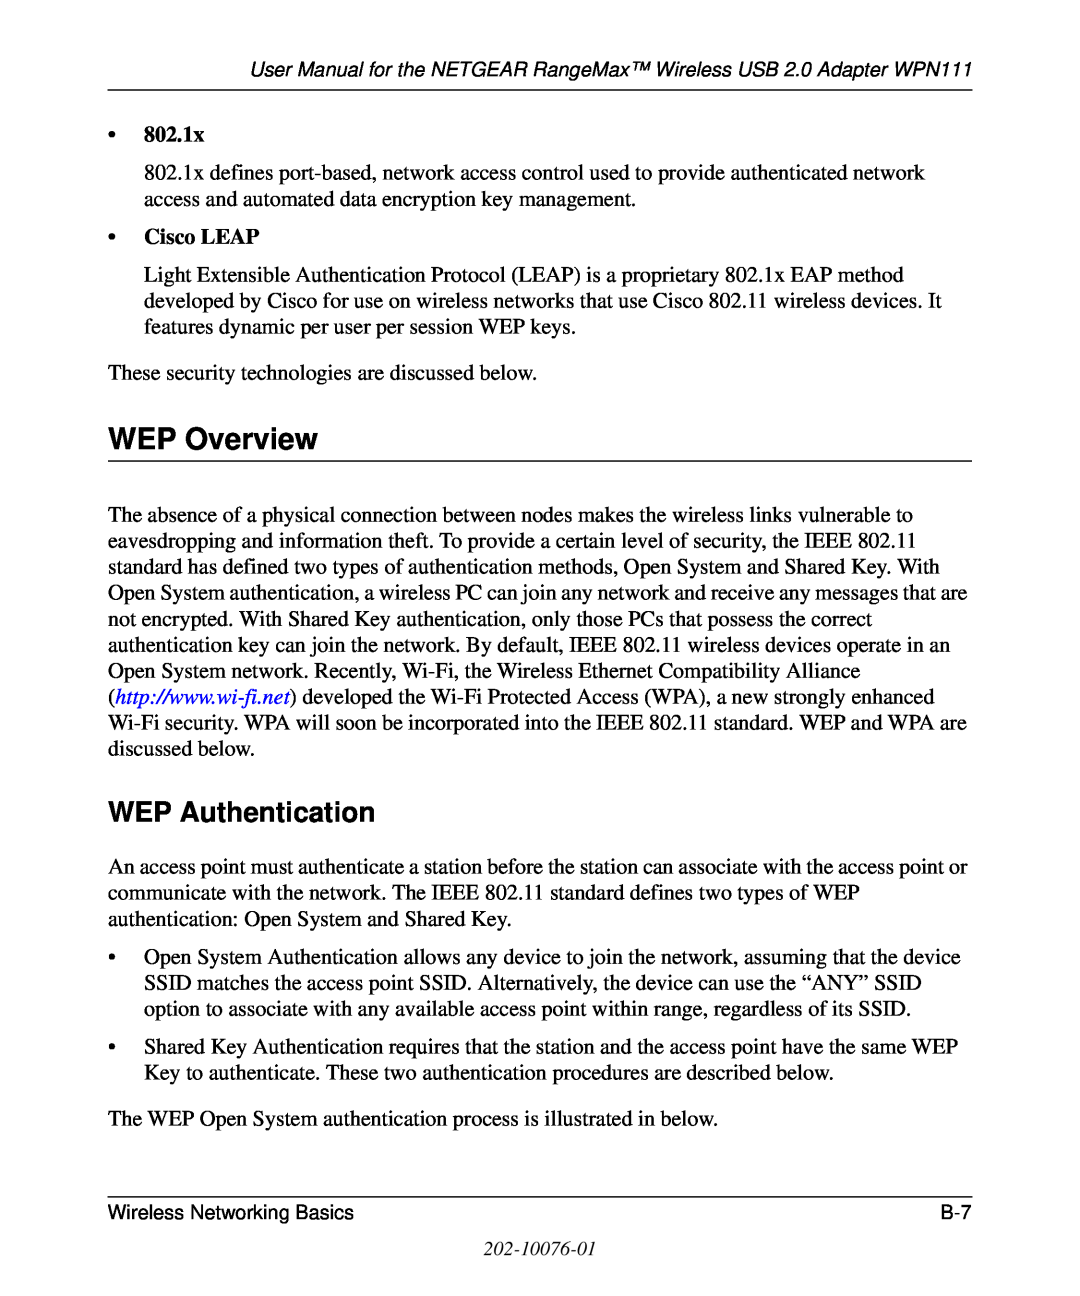 NETGEAR WPN111 user manual WEP Overview, WEP Authentication, 802.1x, Cisco LEAP 